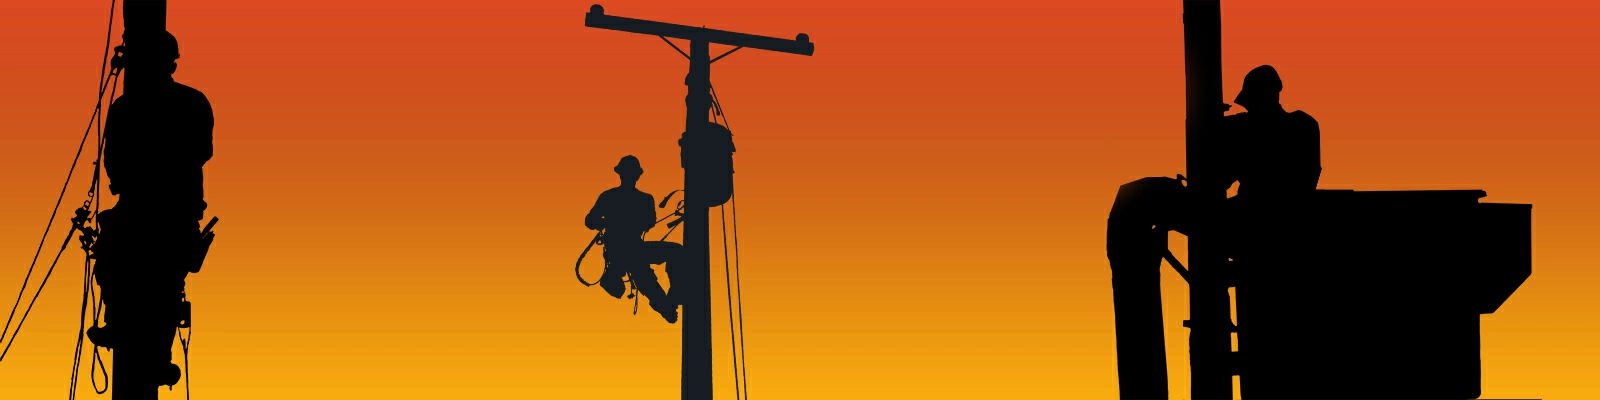 Utility Safety Podcast by Incident Prevention Magazine